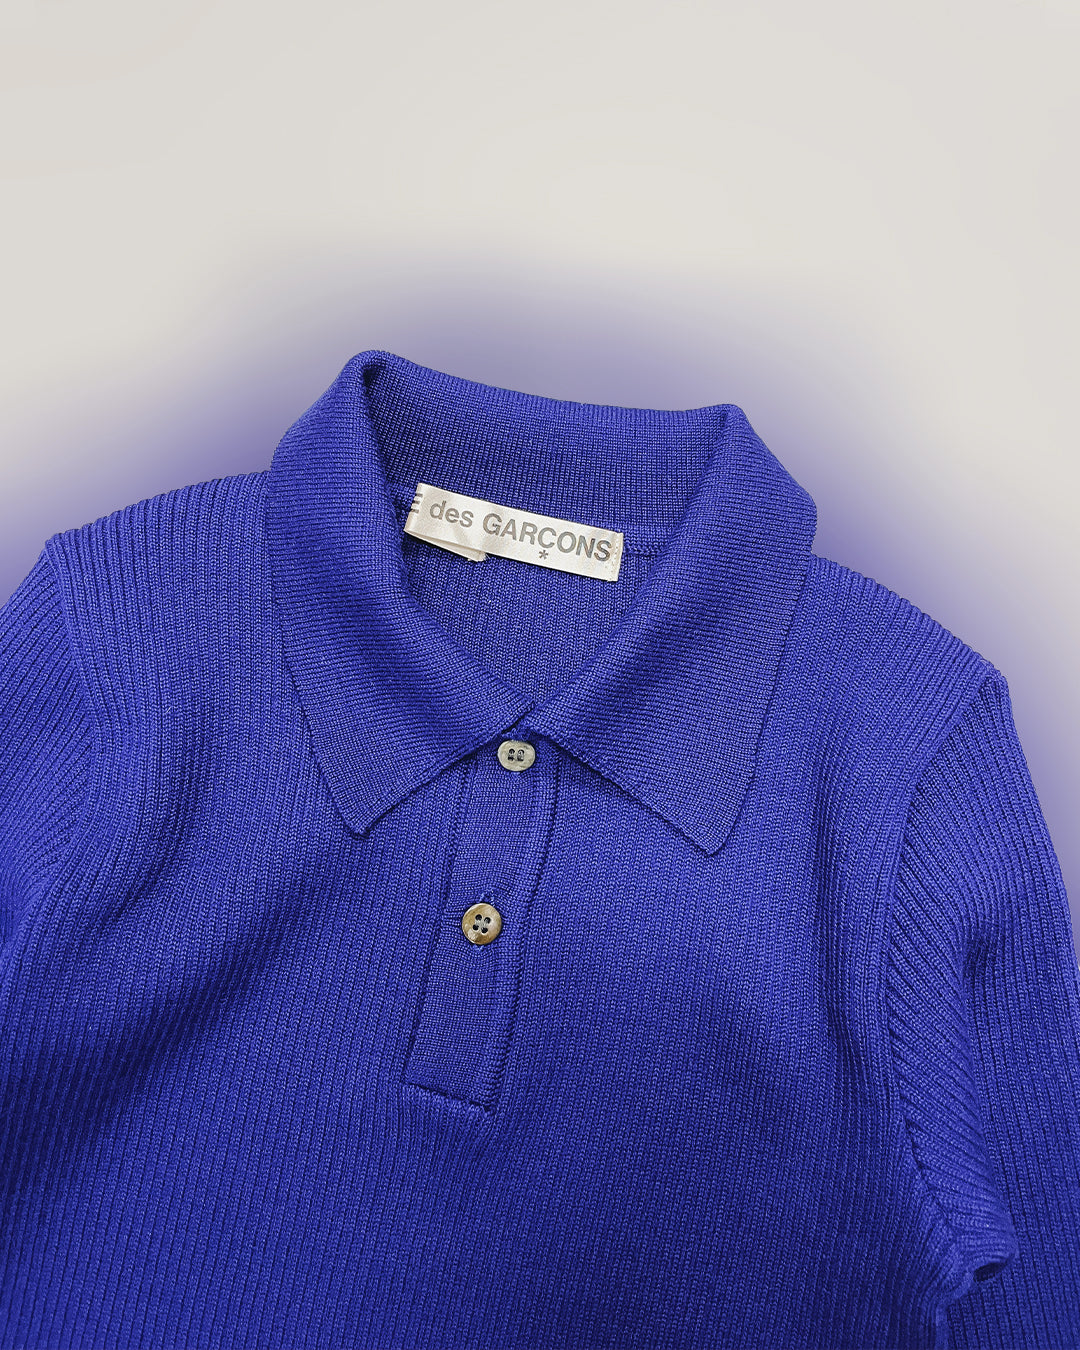 Comme Des Garcons Blue Knit Top 80s Before Midnight Vintage